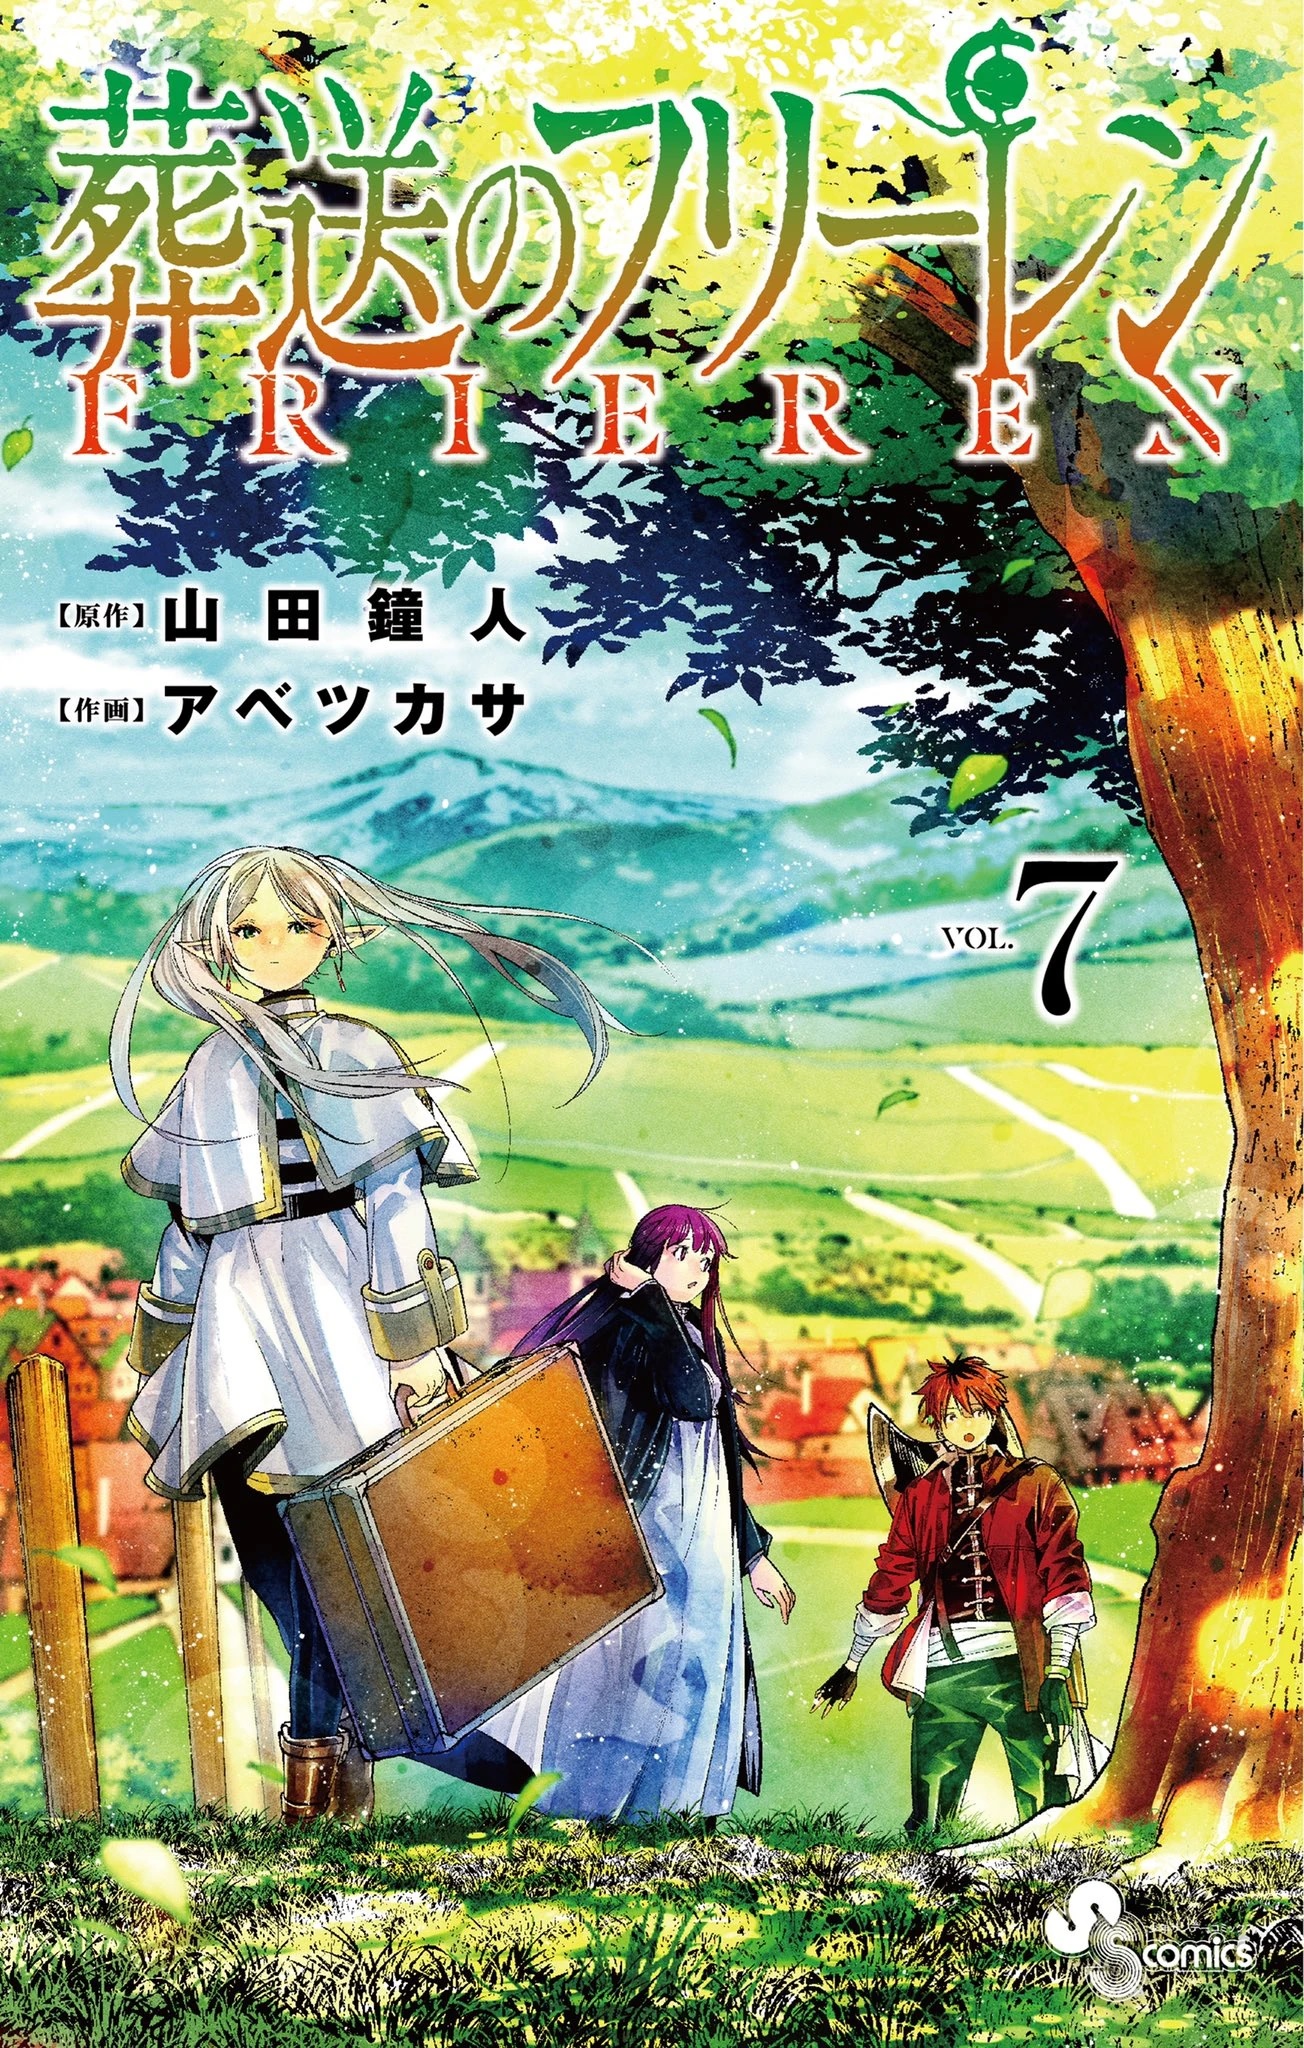 frieren manga after anime volume 7 cover